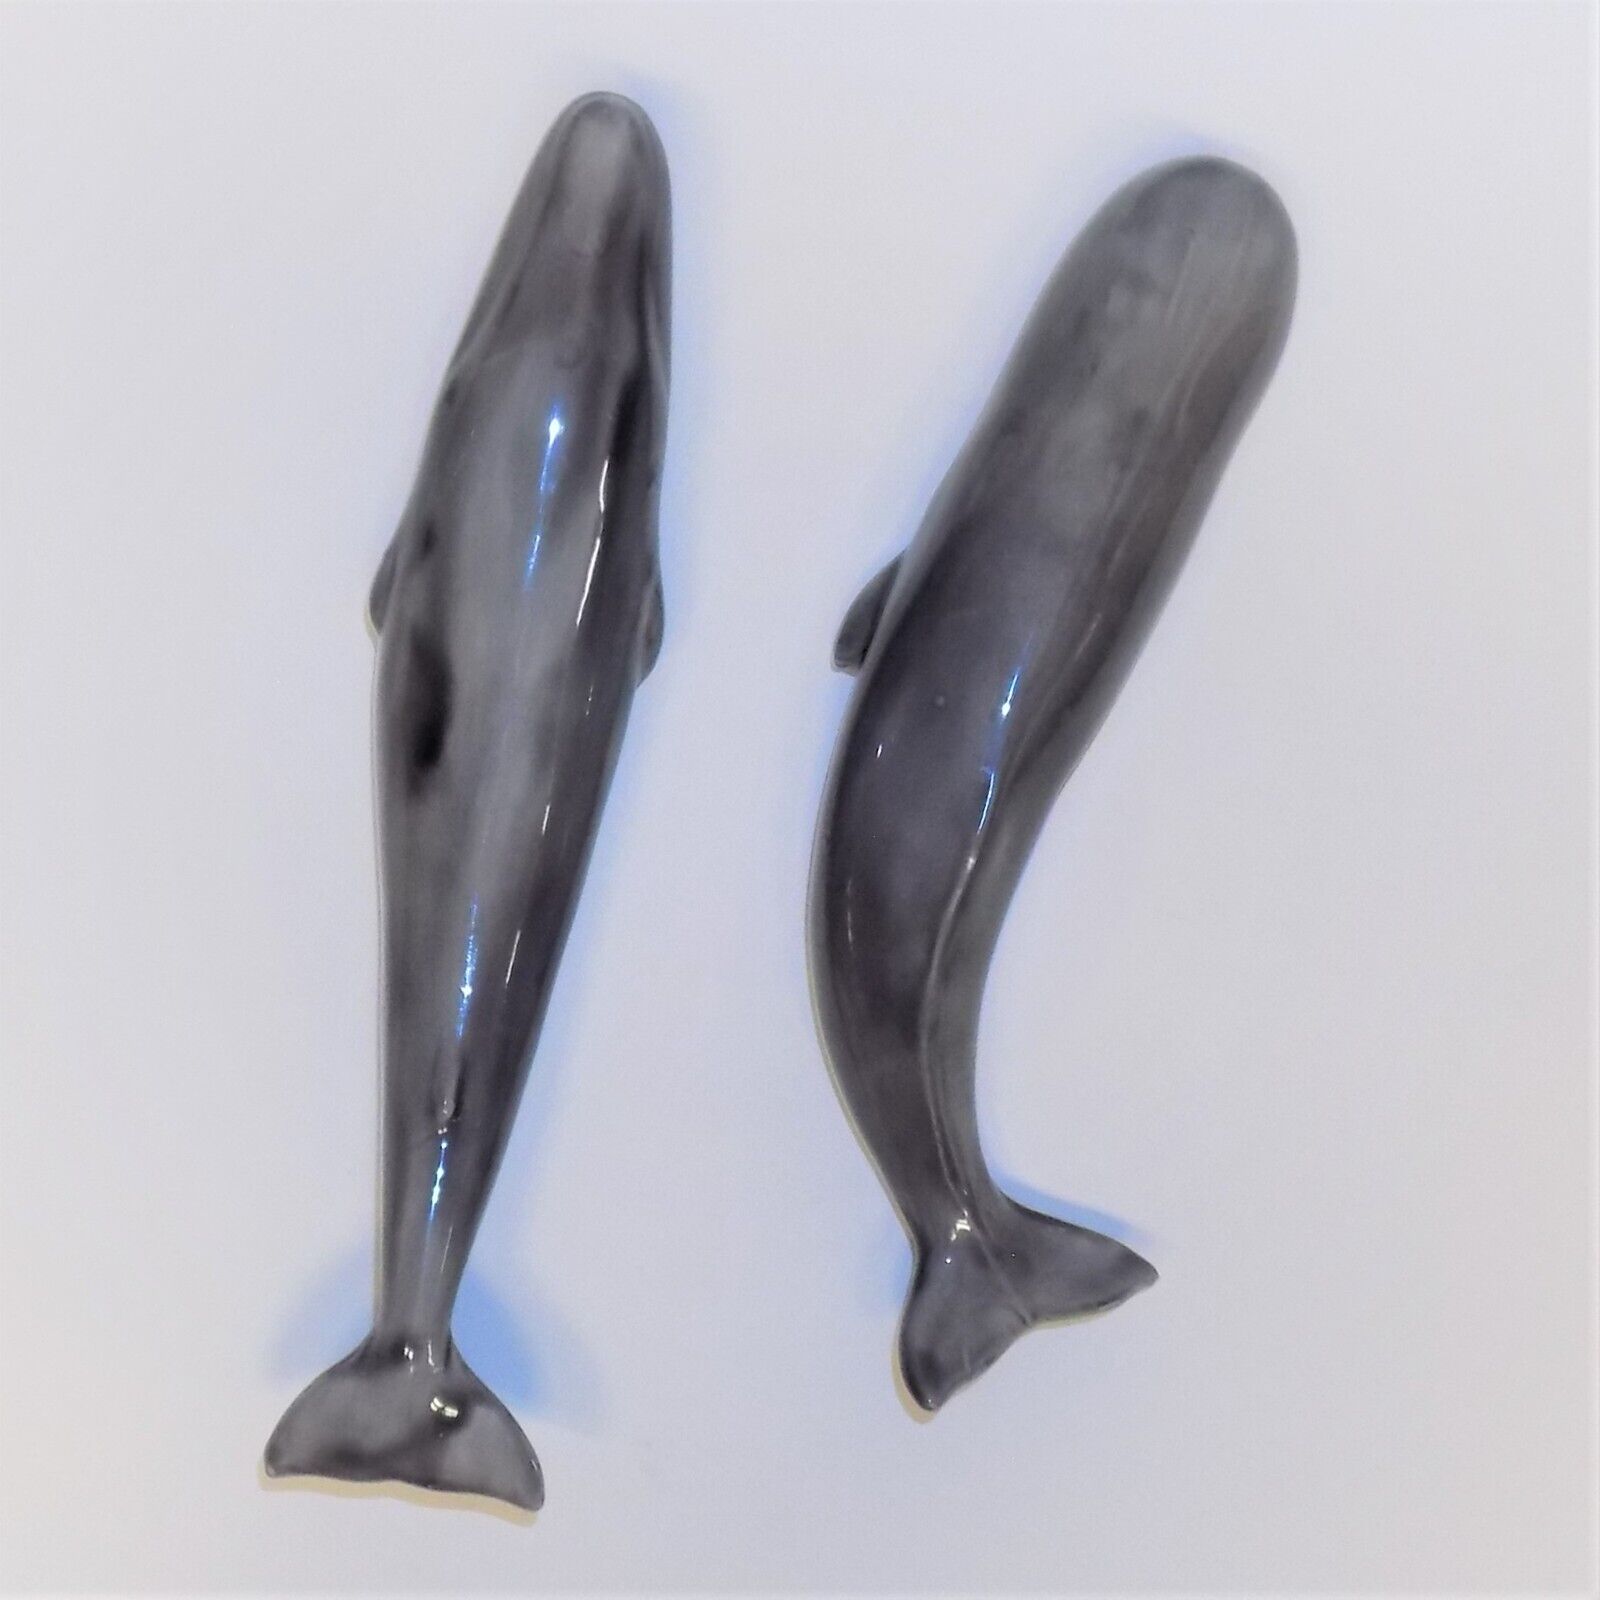 Whale Sculptures Pair of Sperm & Humpback Glossy Ceramic Wall or Table Display